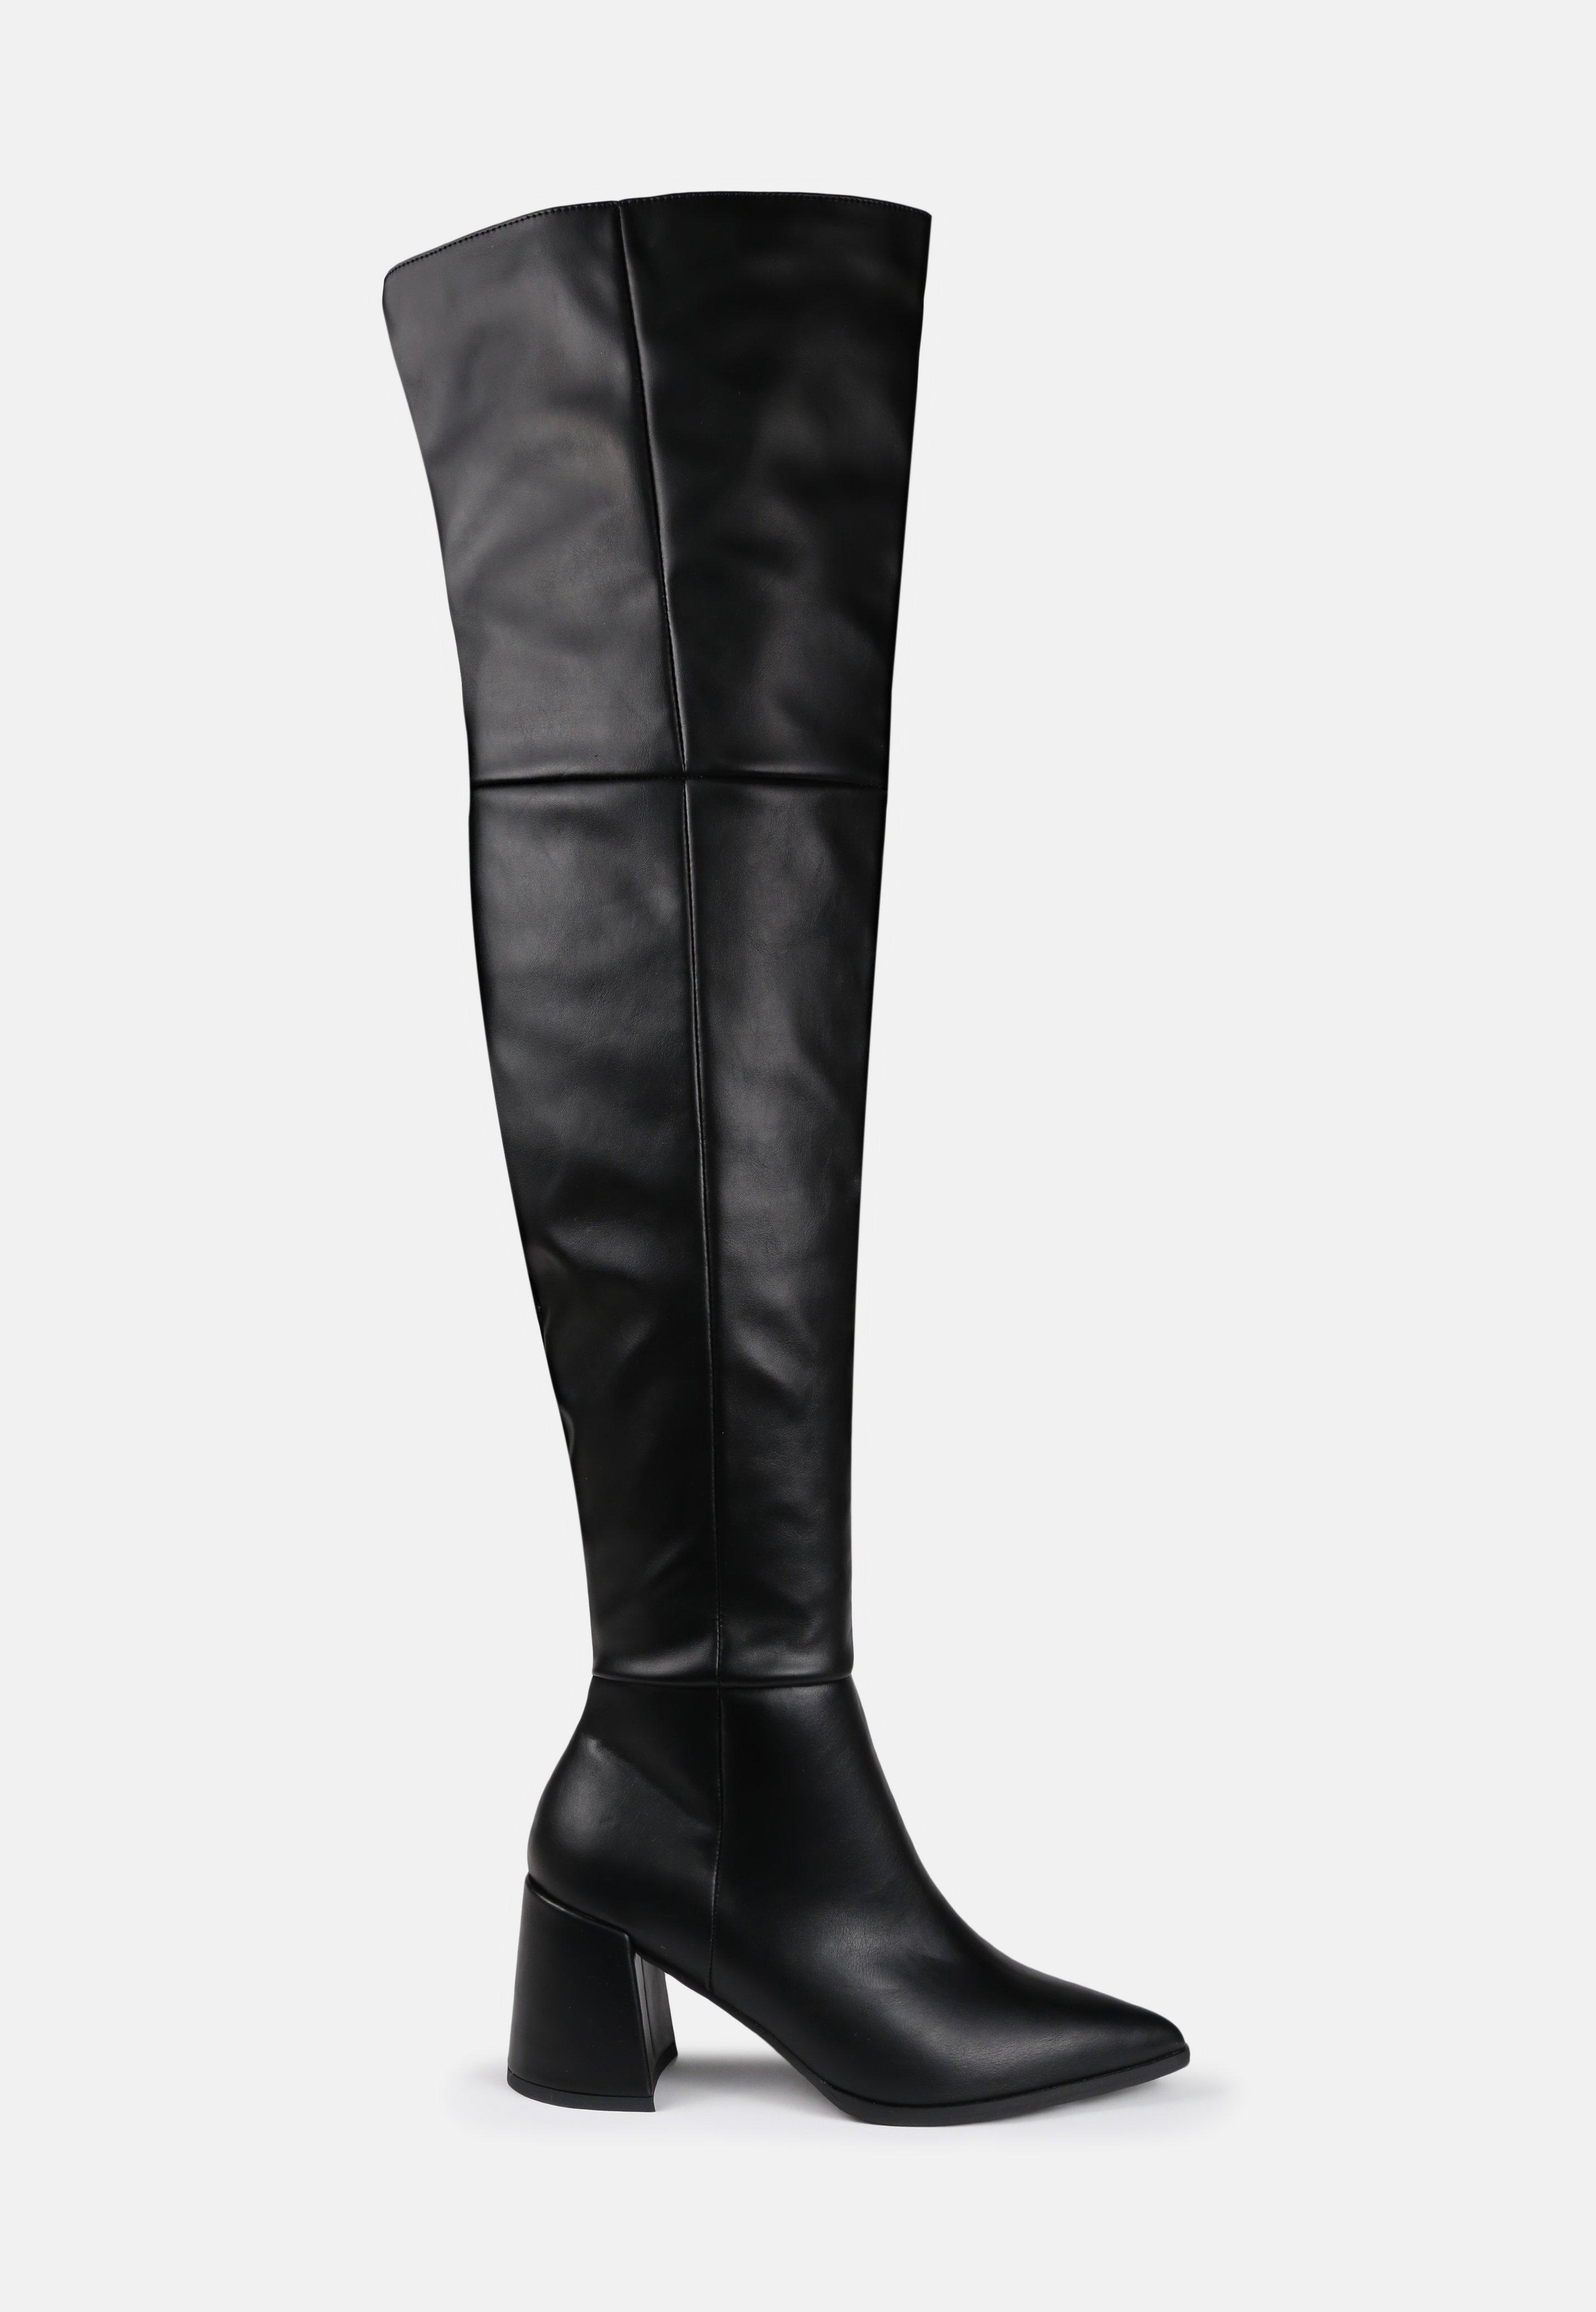 Missguided Low Block Heel Over The Knee Boots in Black Lyst